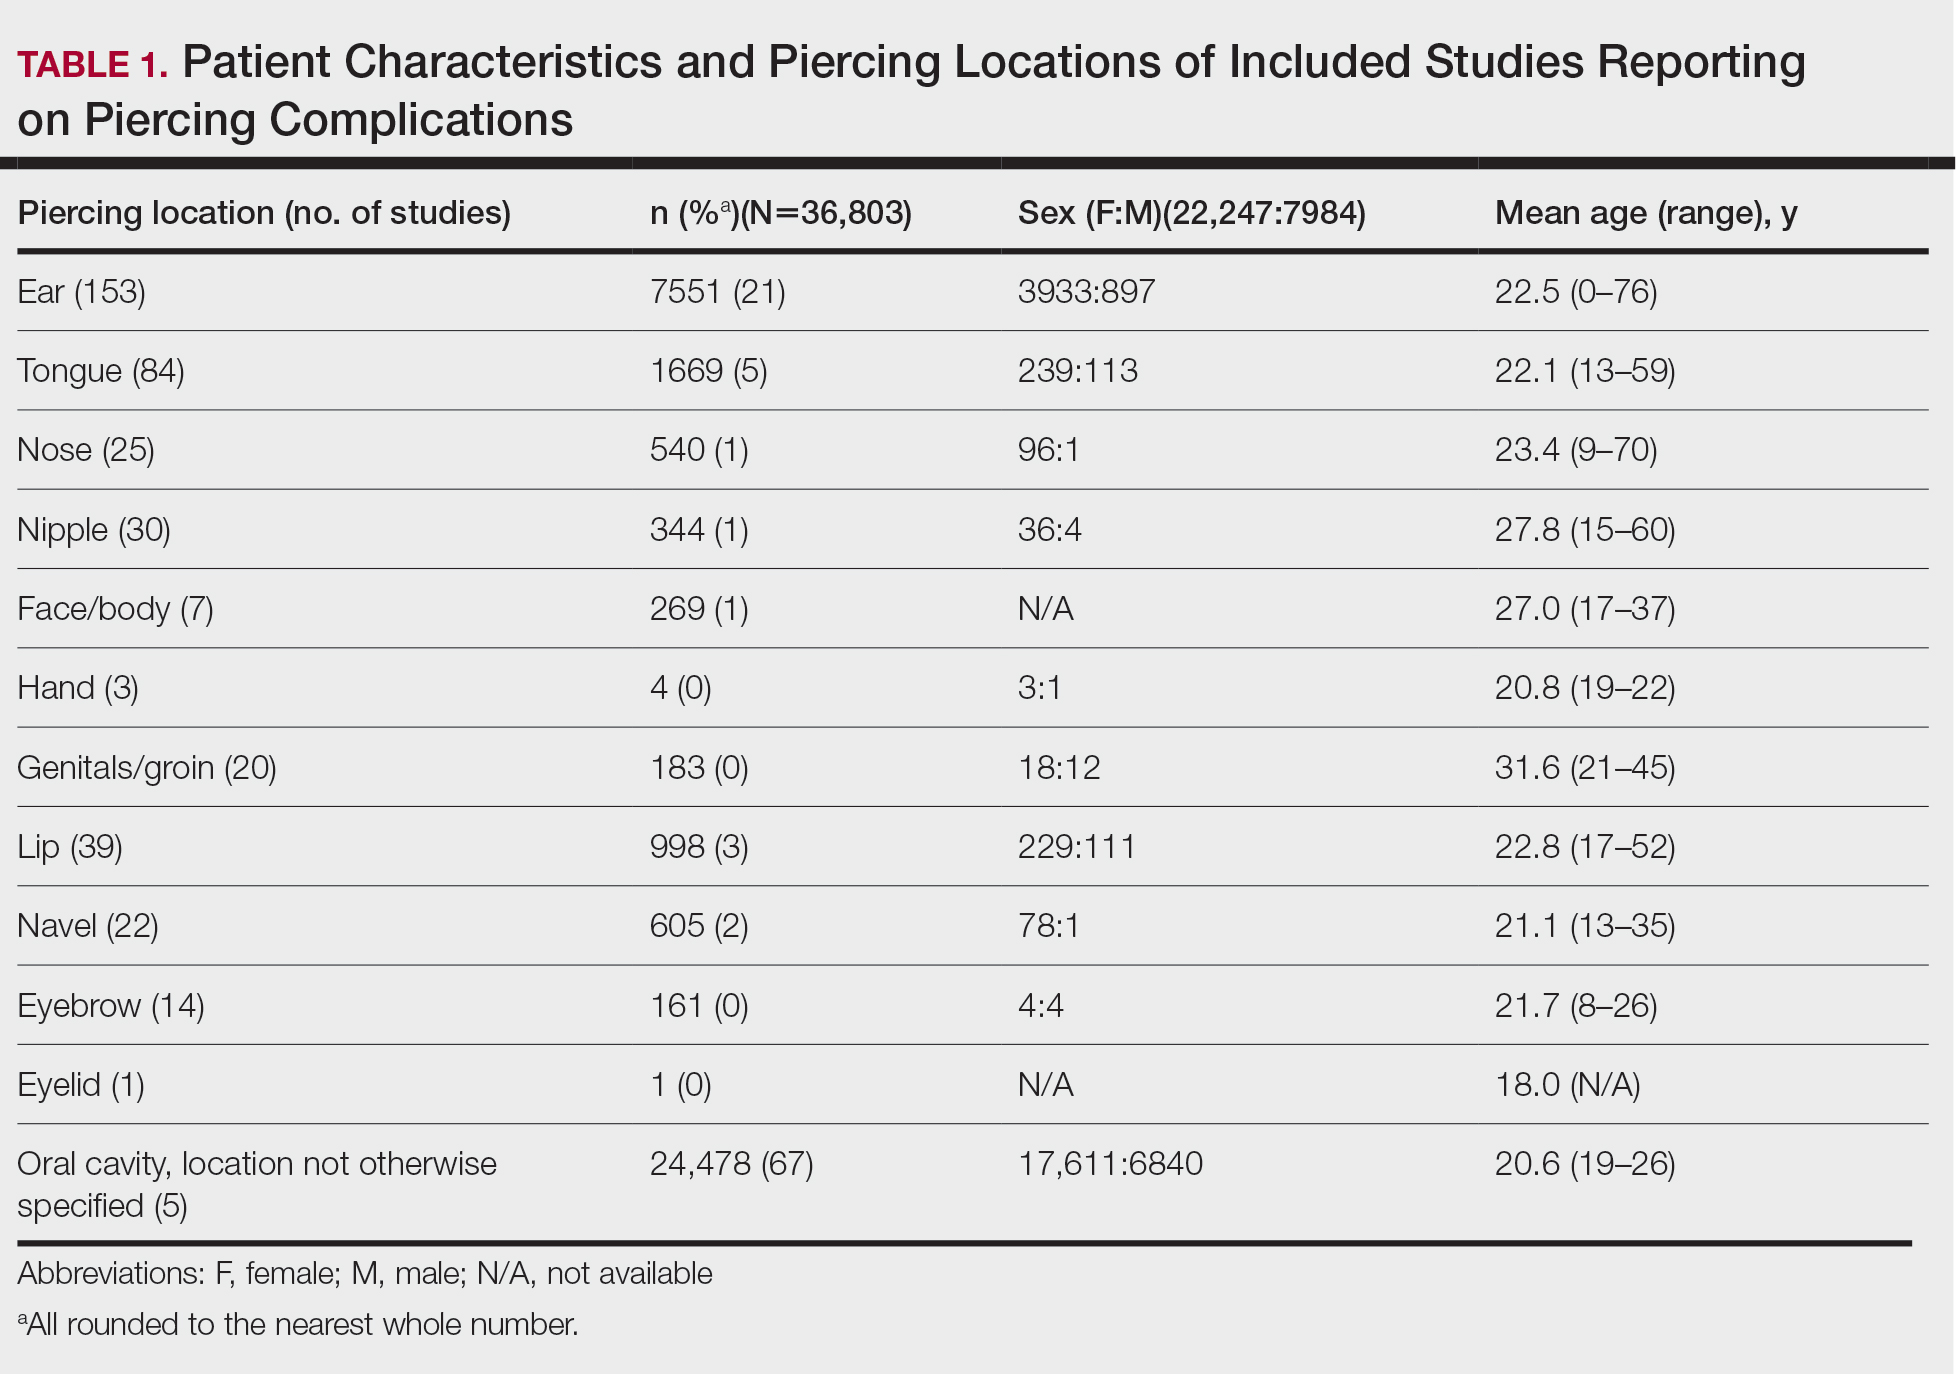 Patient Characteristics and Piercing Locations of Included Studies Reporting on Piercing Complications